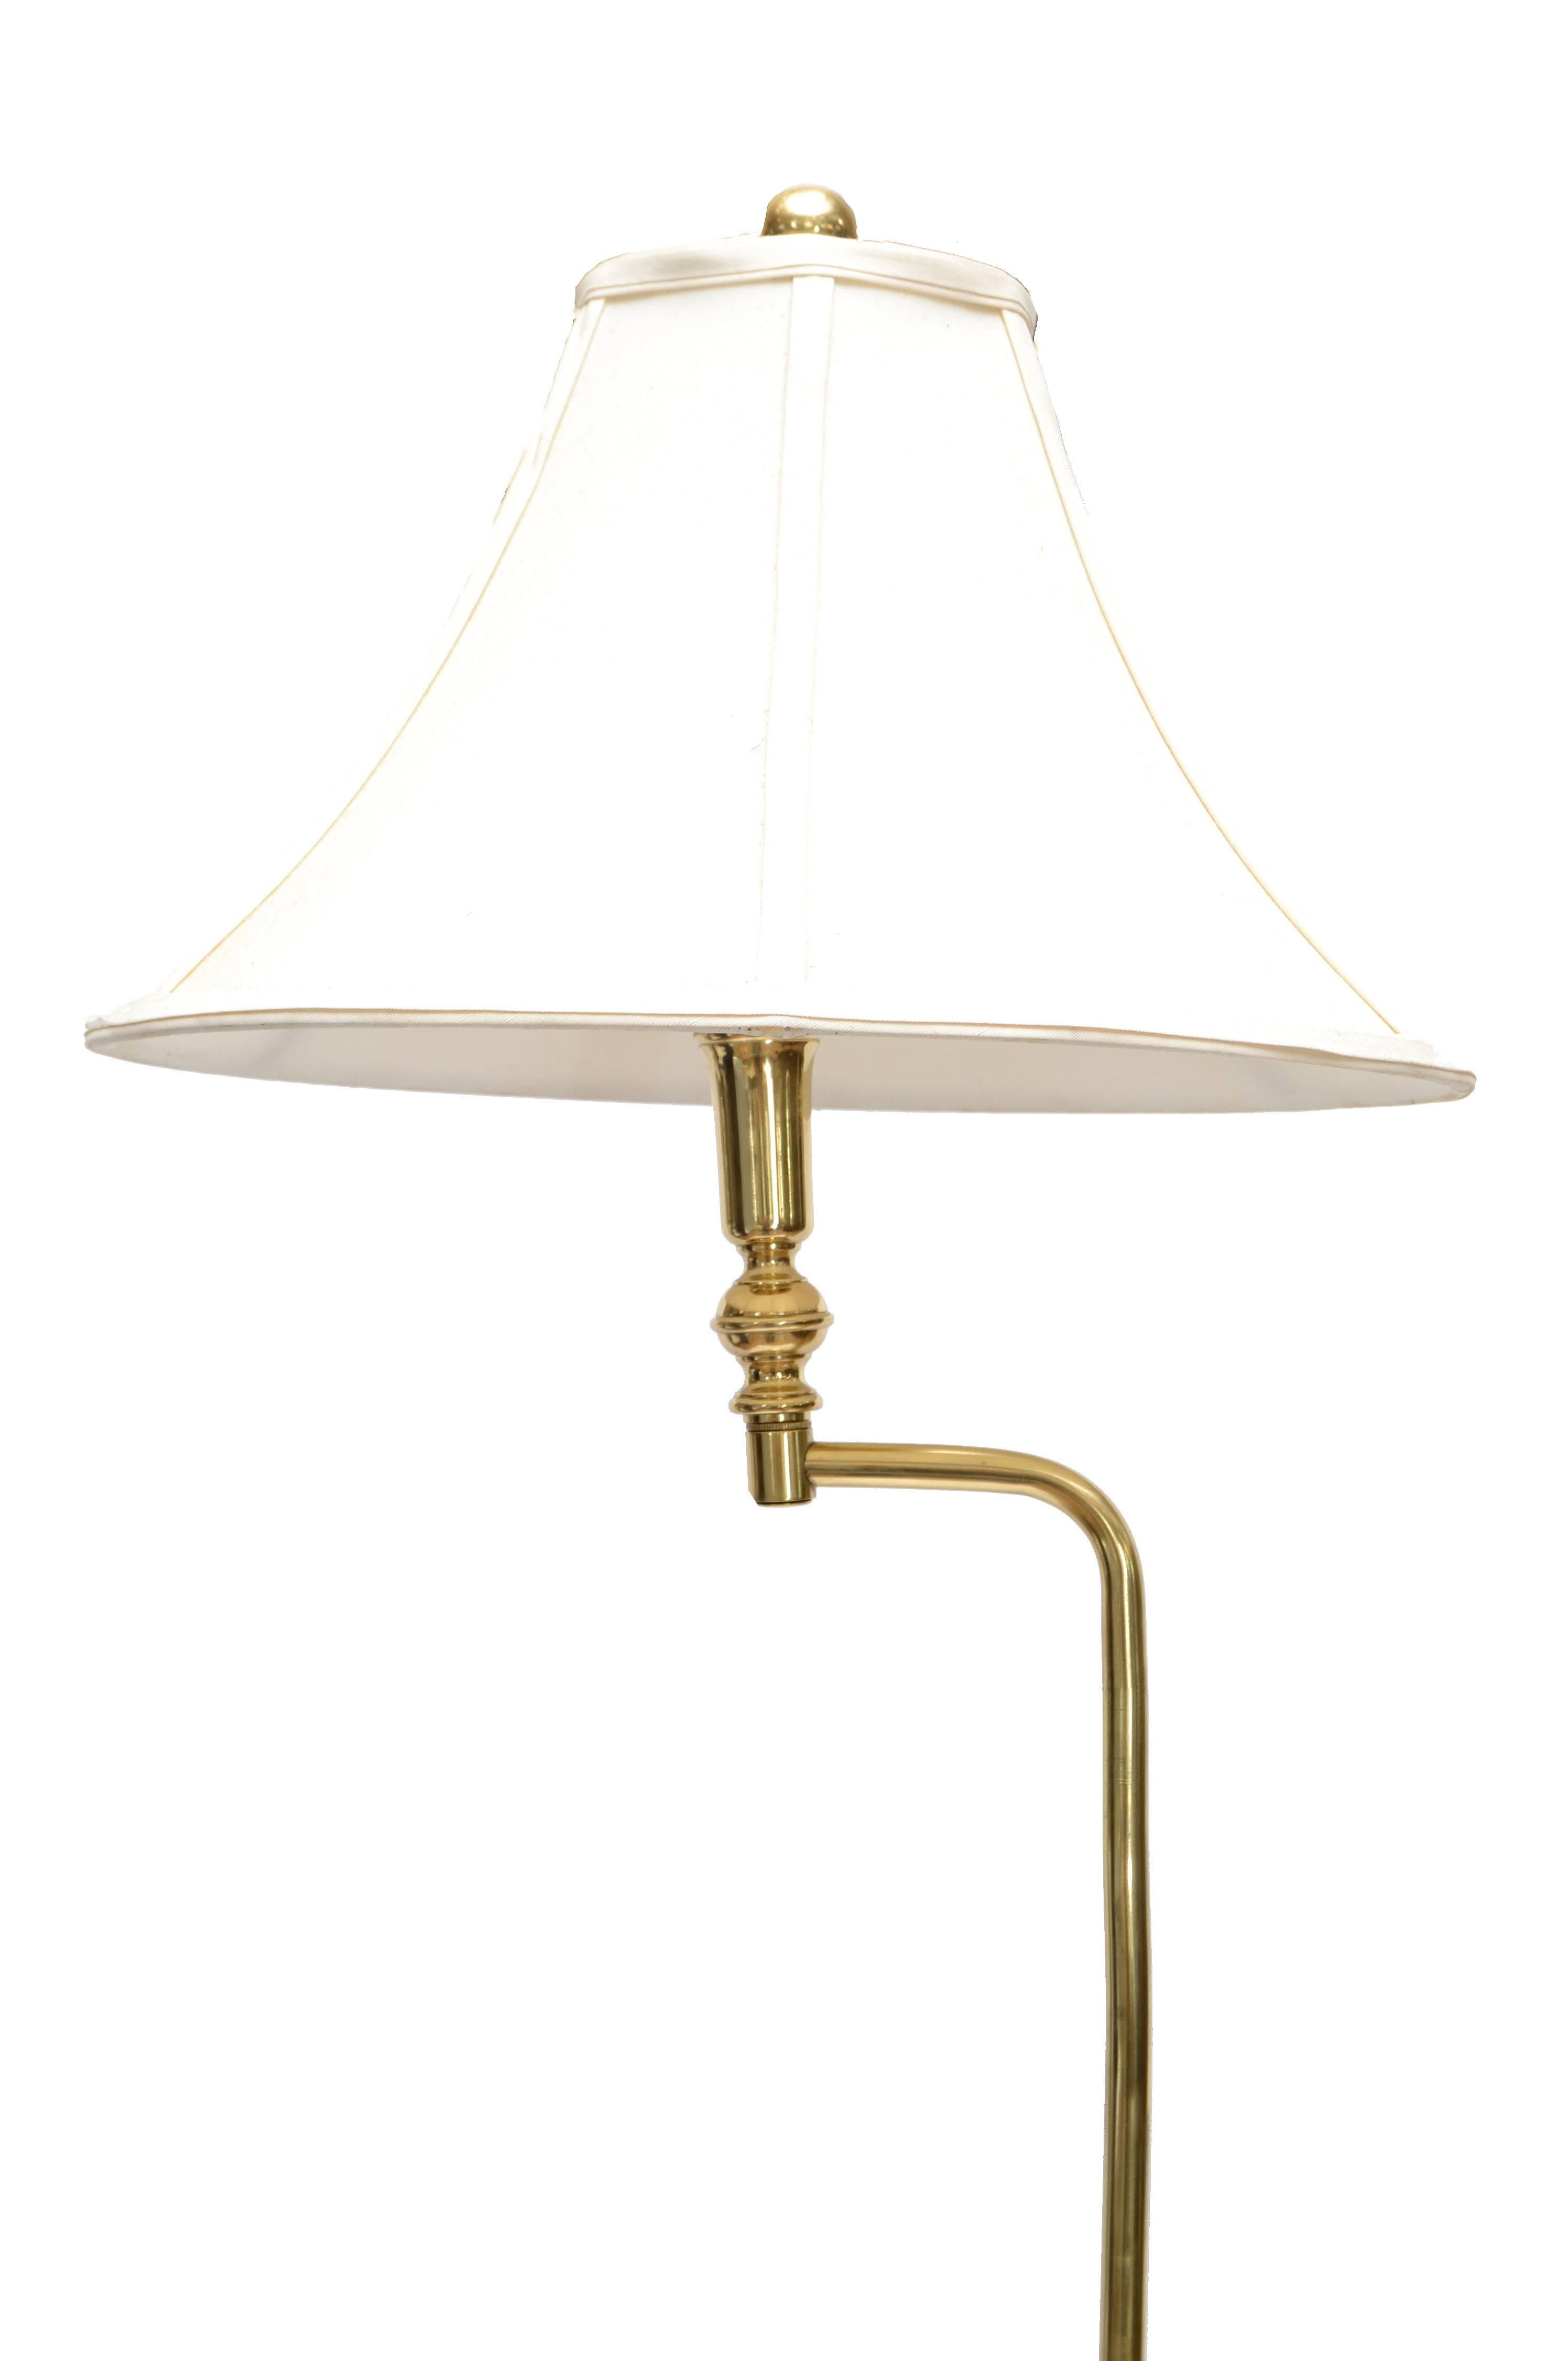 Hollywood Regency tall swing arm brass floor lamp with shade.
It is easy to swing in a 90 degree angle, perfect for reading.
Wired for the U.S. and uses a max. 60 watts light bulb.
The shade is made out of fabric.
Dimension shade:
Diameter: 15